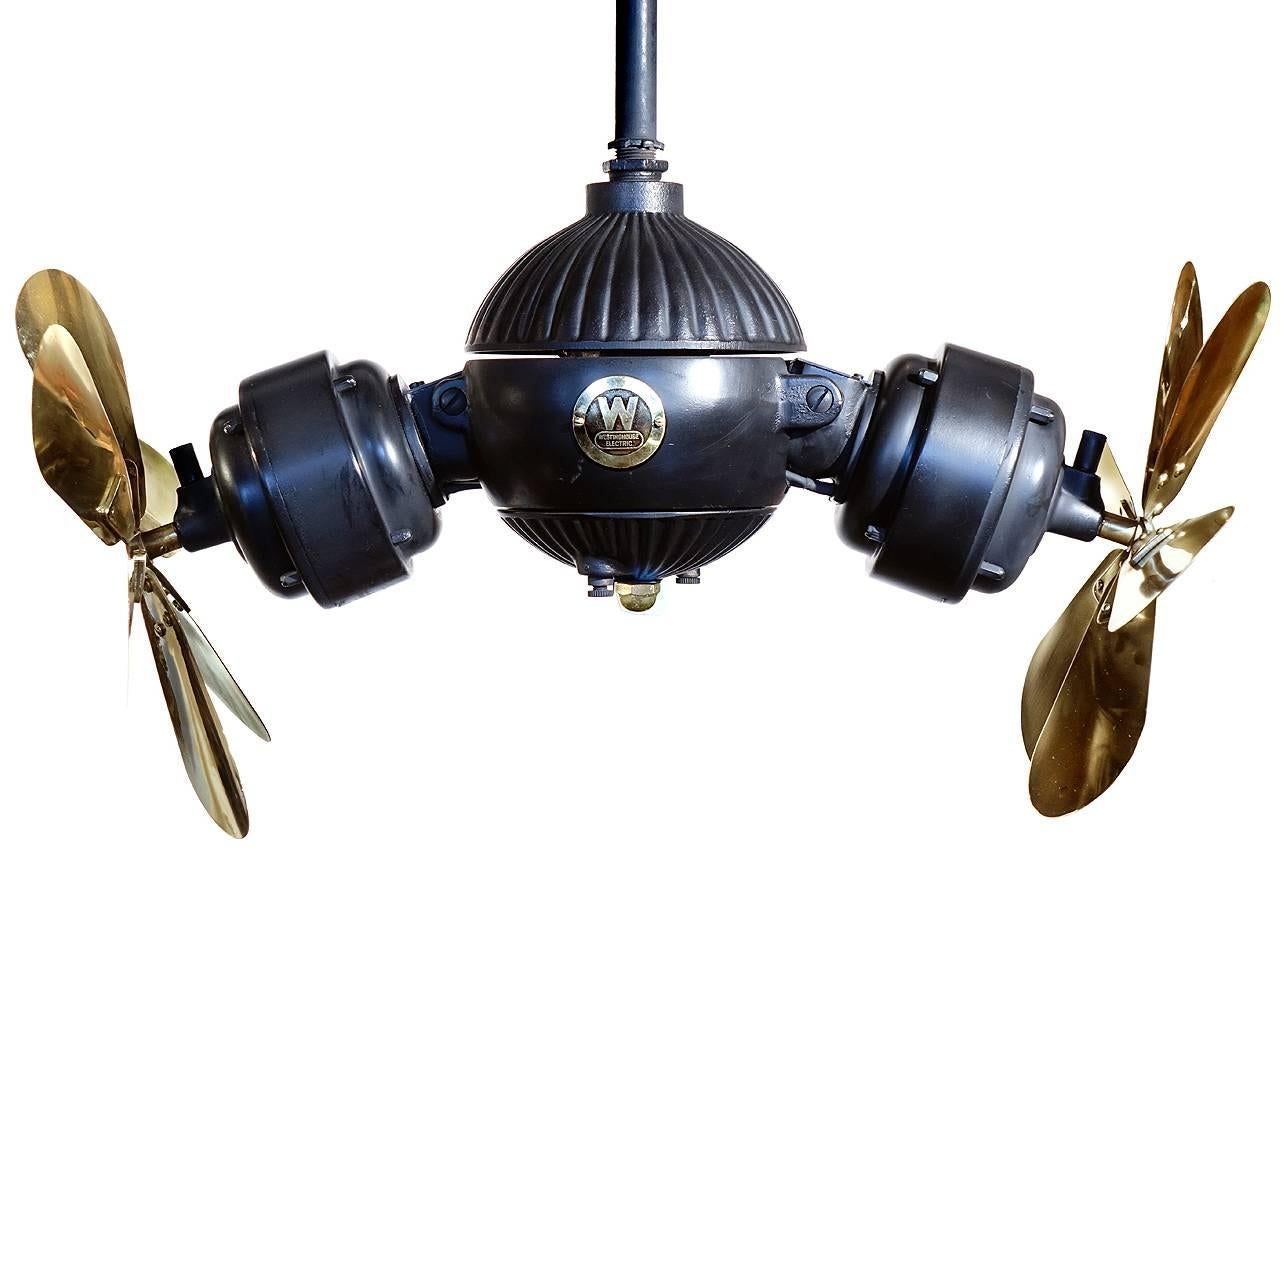 Rare Westinghouse Double Gyro Ceiling Fan